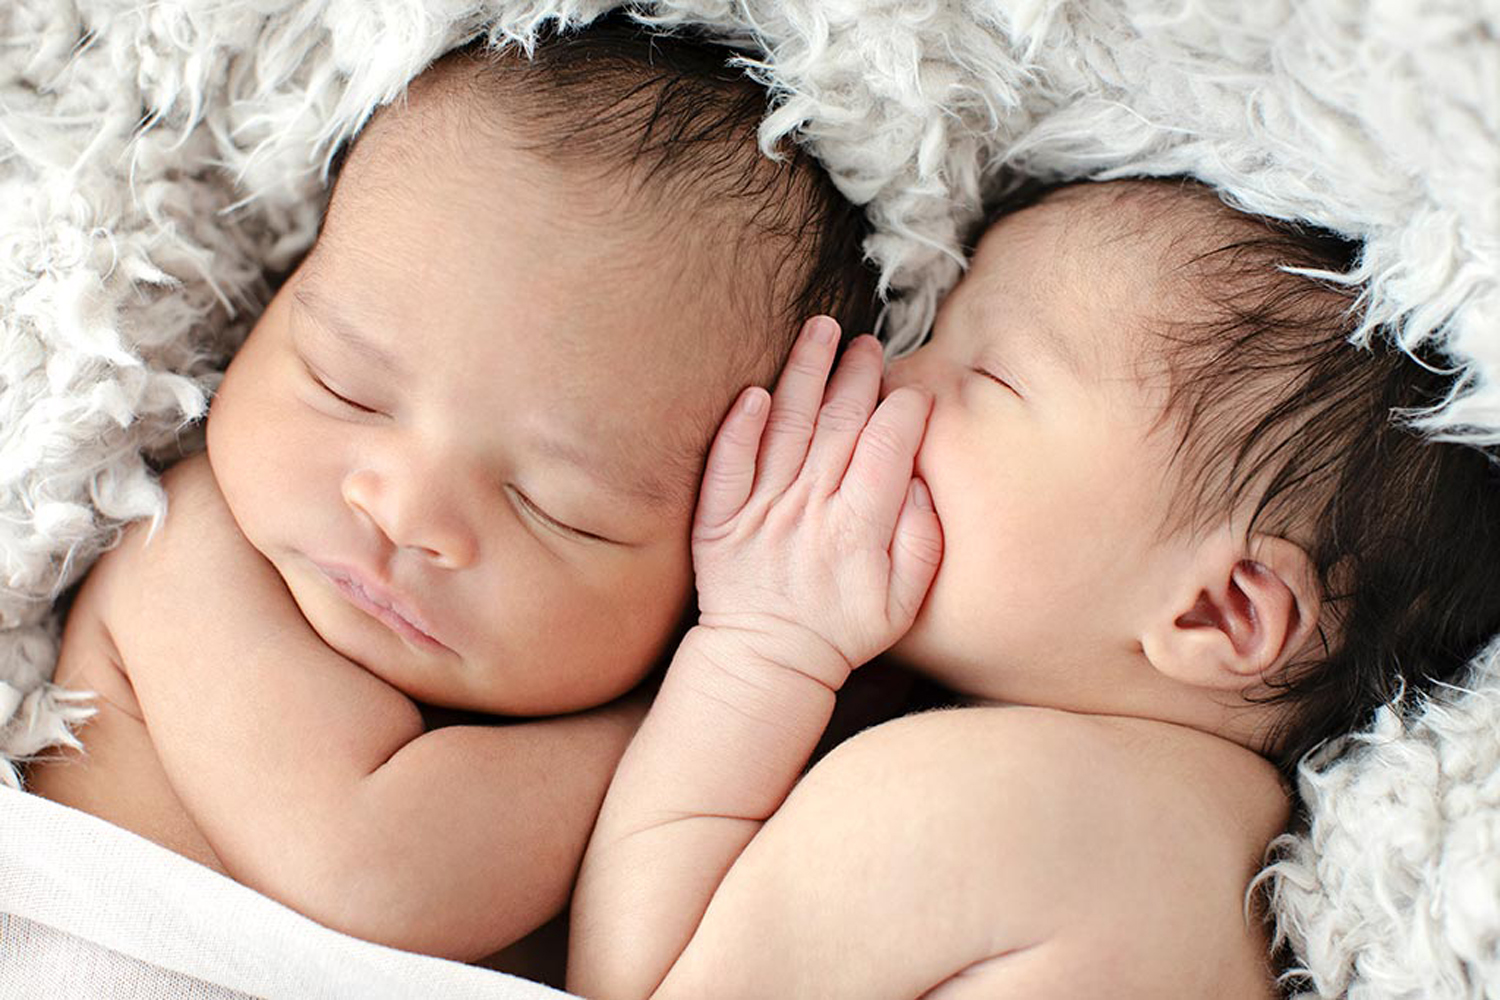 Two newborn babies cuddle on a fluffy white material.